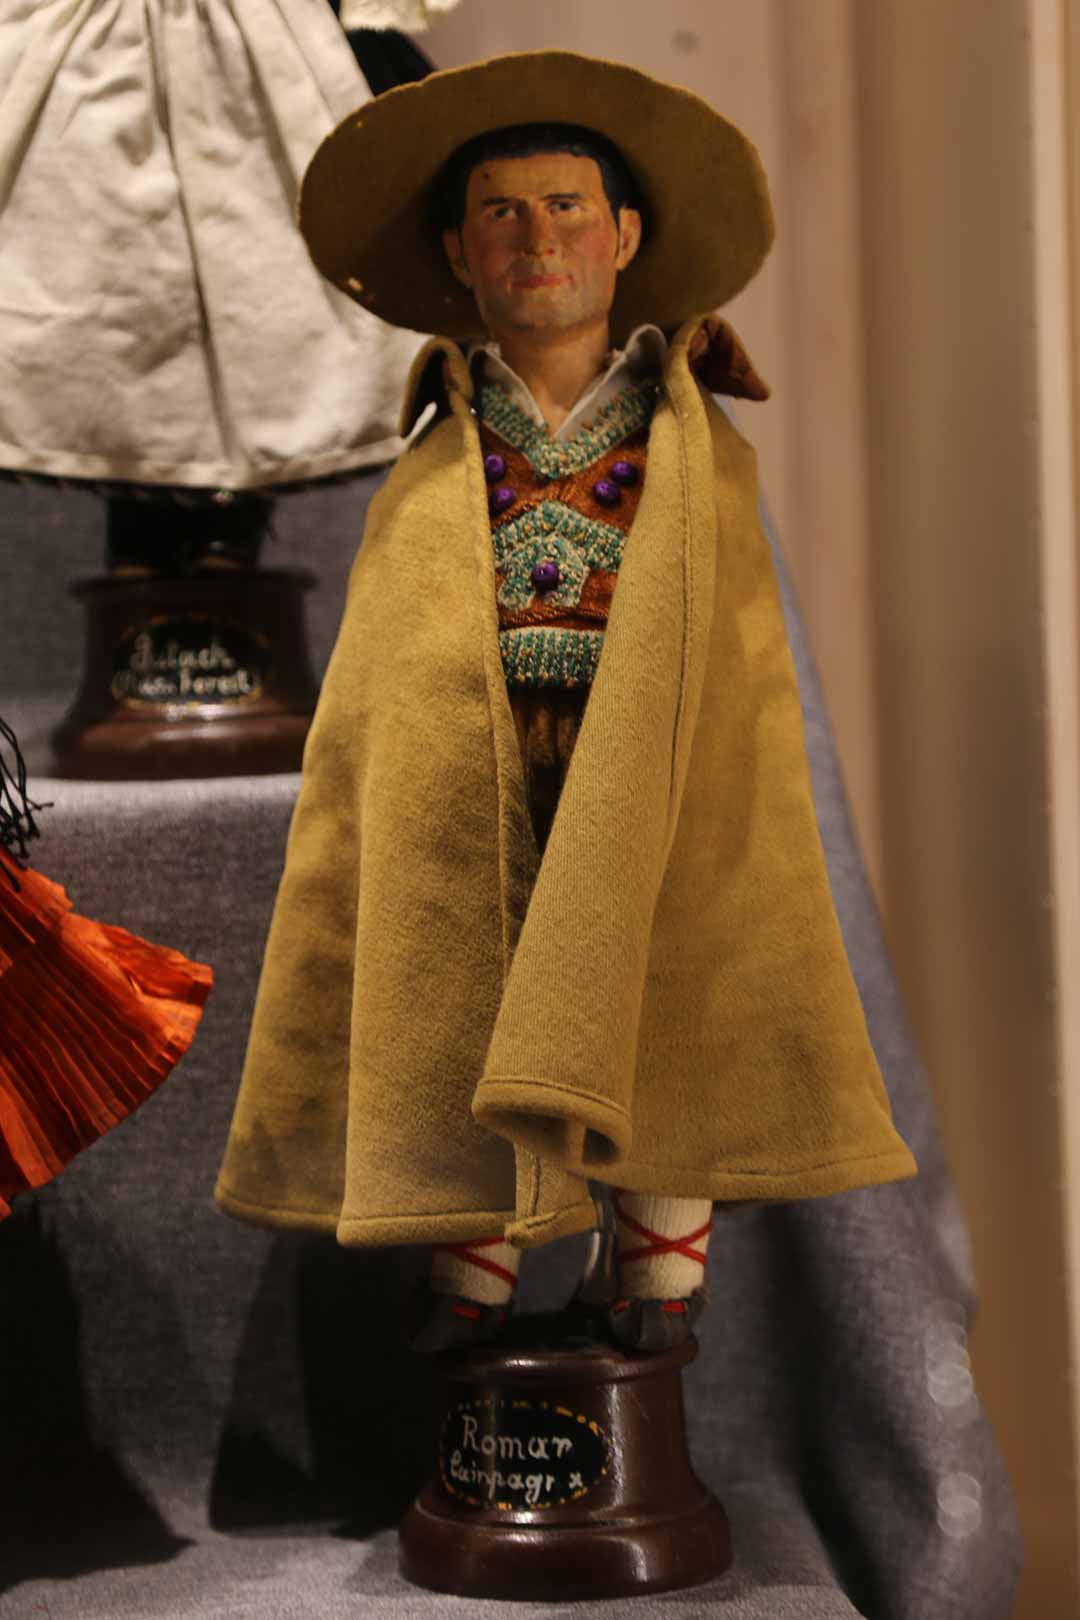 Male doll wearing shawl and hat, labelled Roman